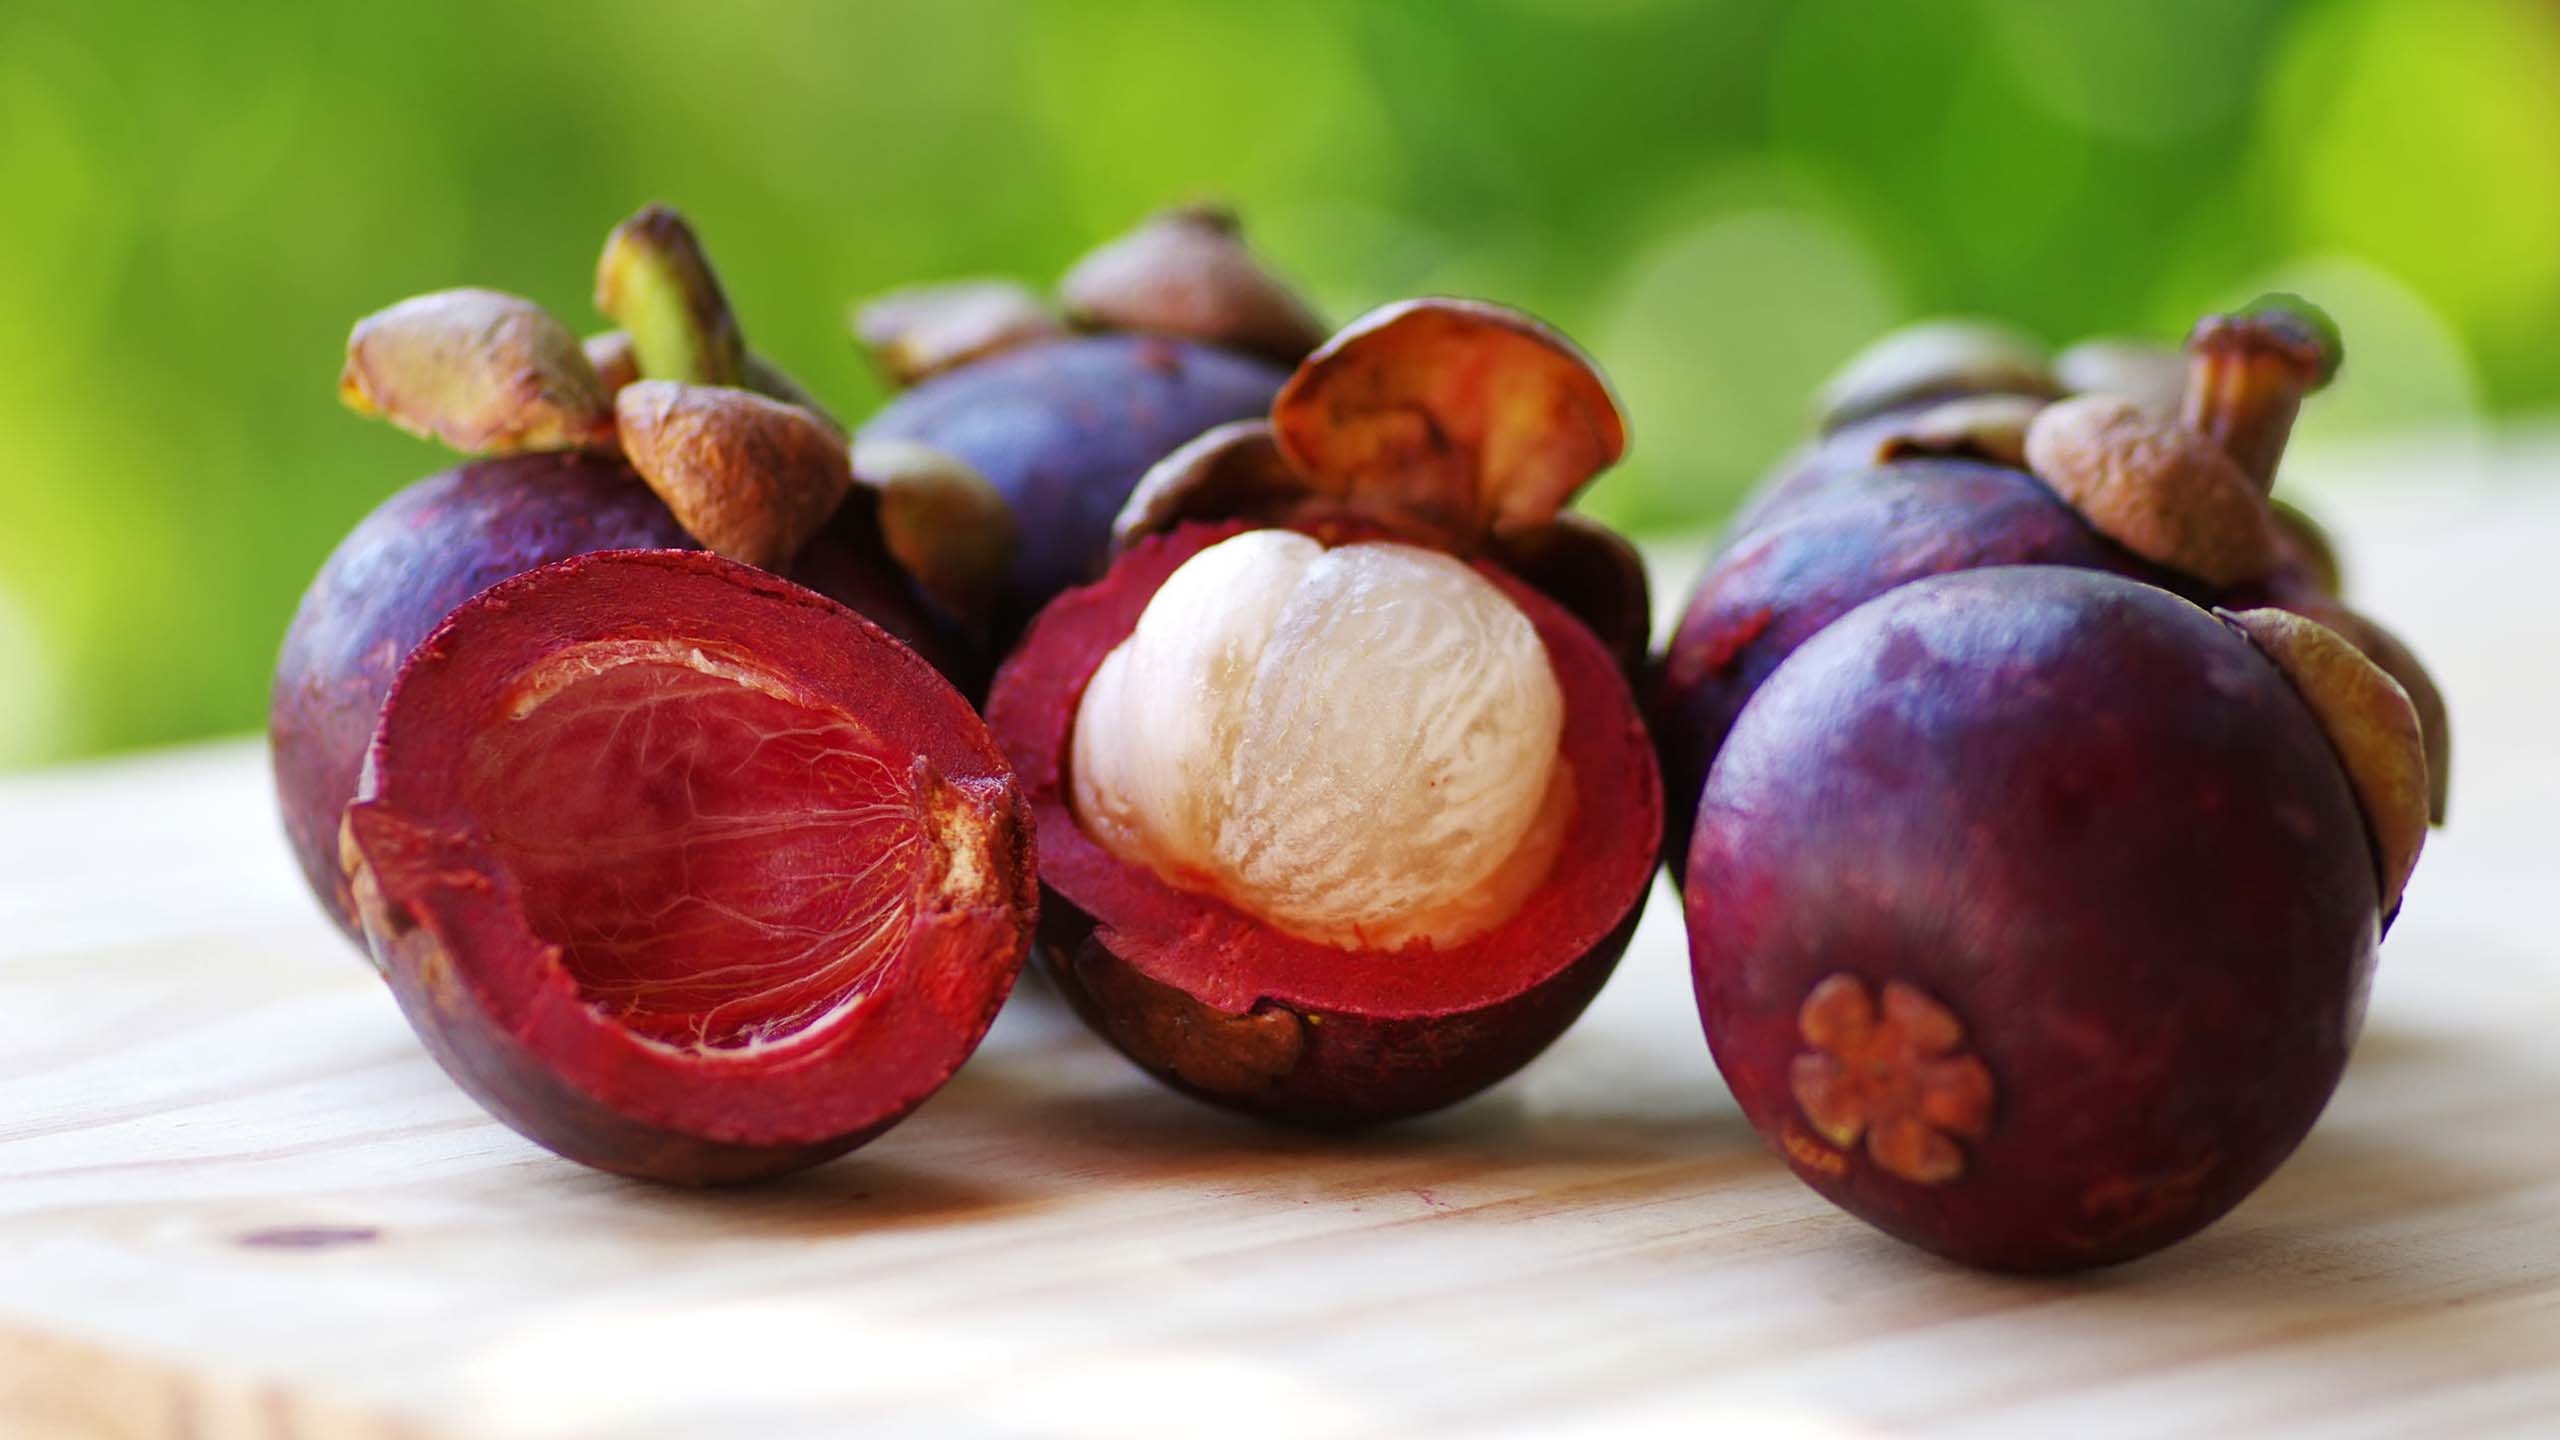 Mangosteen: Cultivated in Java, Sumatra, Indochina, and the southern Philippines. 2560x1440 HD Wallpaper.